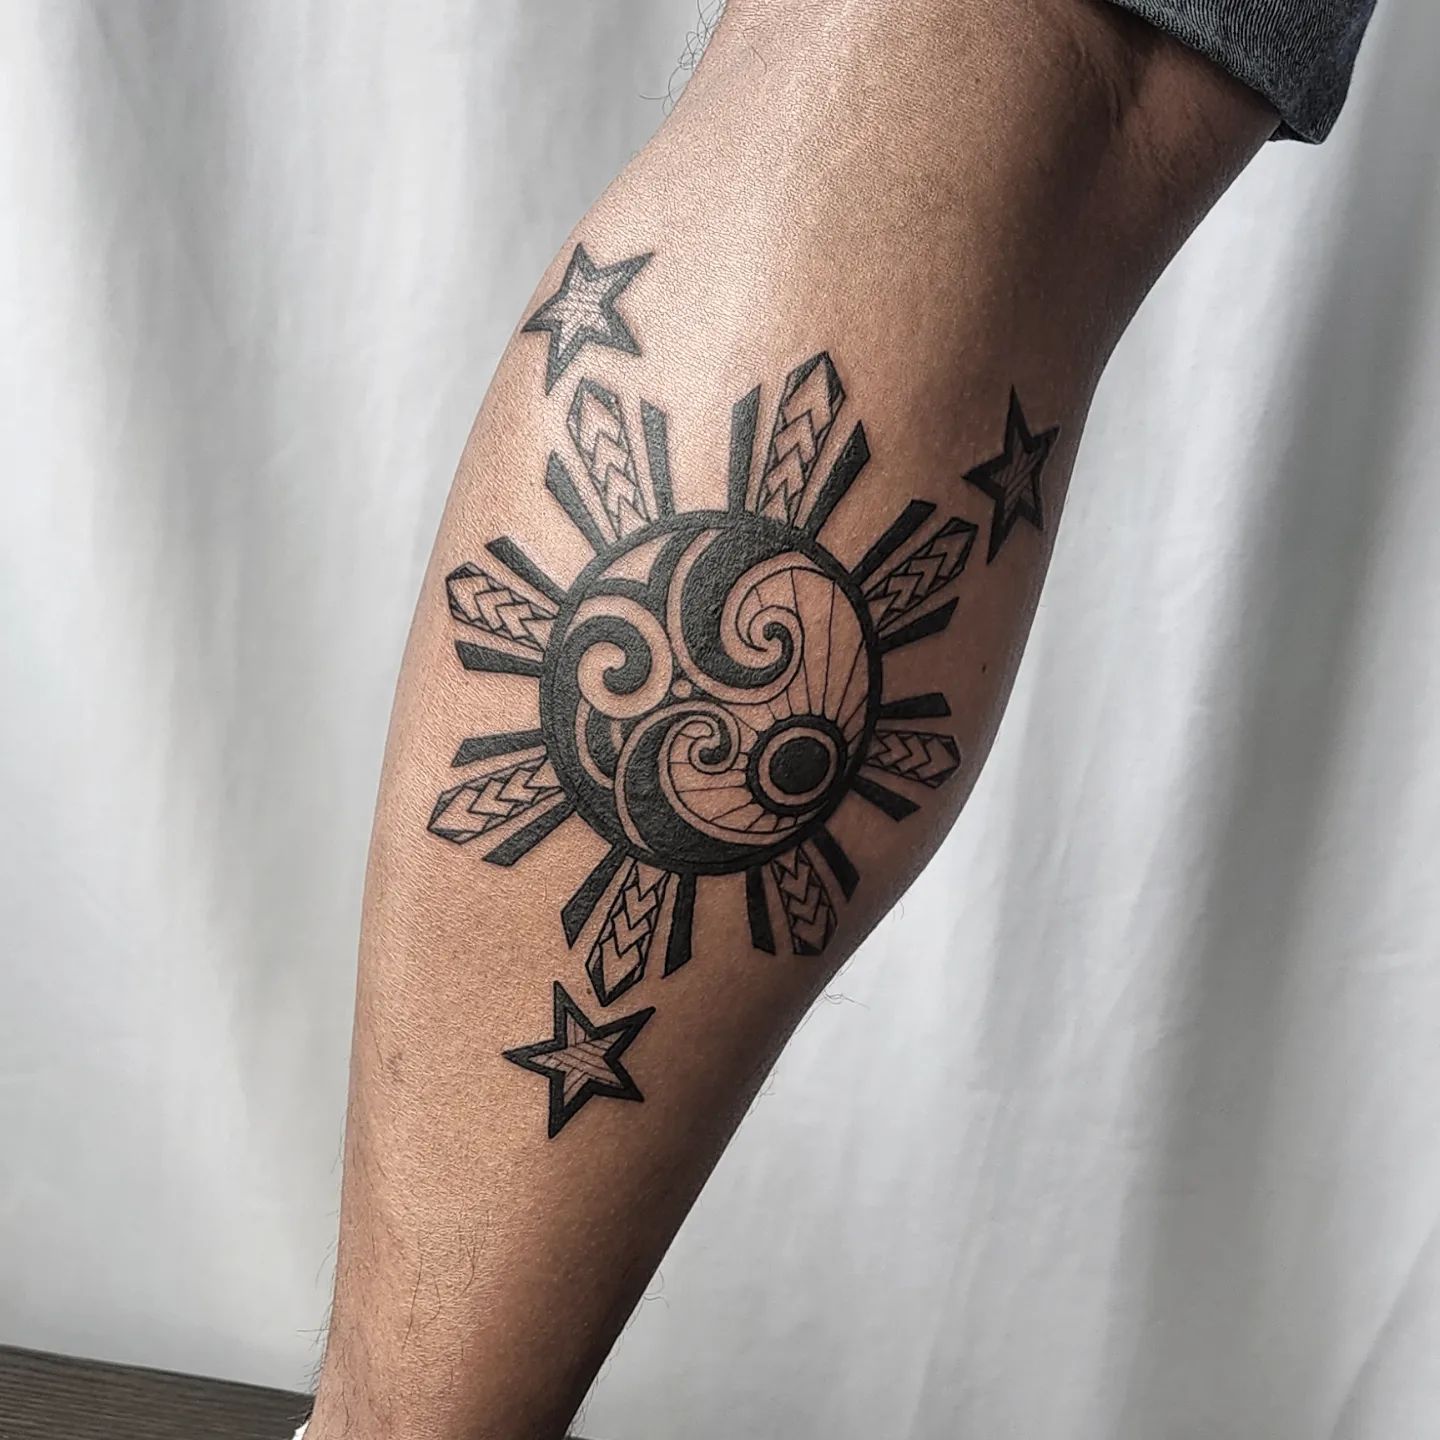 Clare Lynne Ramirez on X First tattoo  Design inspired by the sun and  stars on the flag of the Philippines httpstcogDwgZFcmD8  X